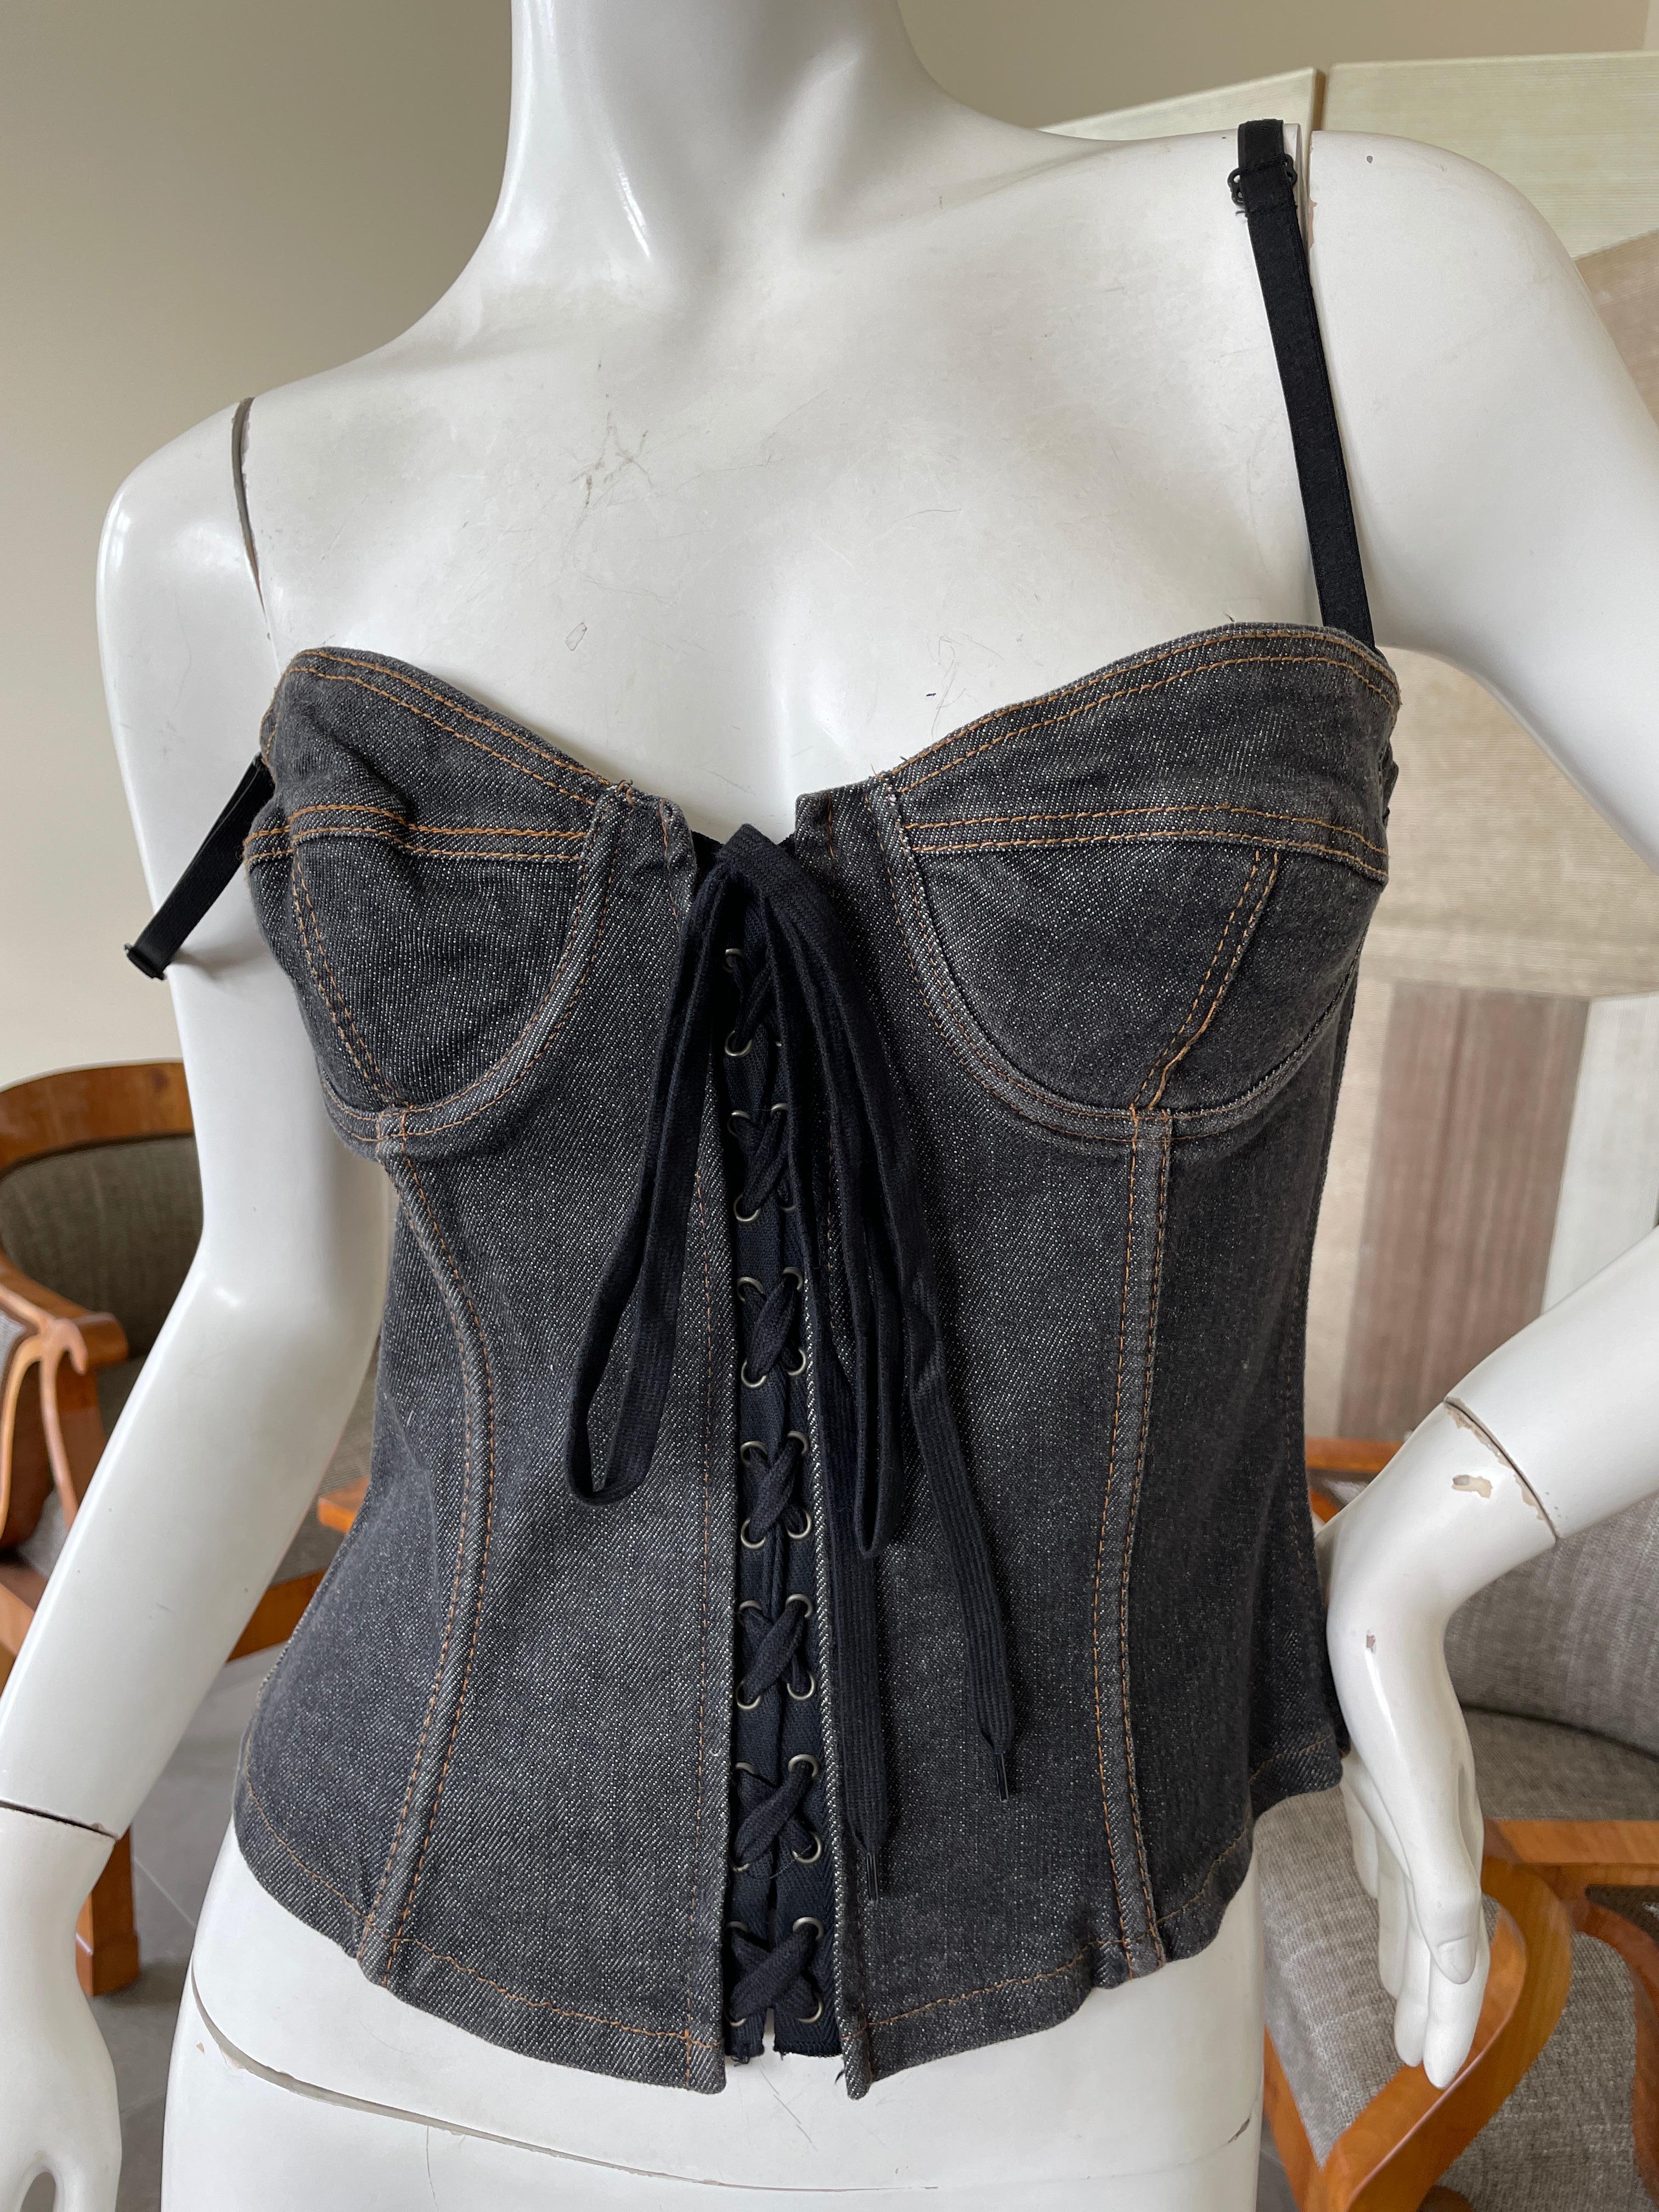 Dolce & Gabbana for D&G Sexy Gray Denim Corset with Lace Up Details. In Excellent Condition For Sale In Cloverdale, CA